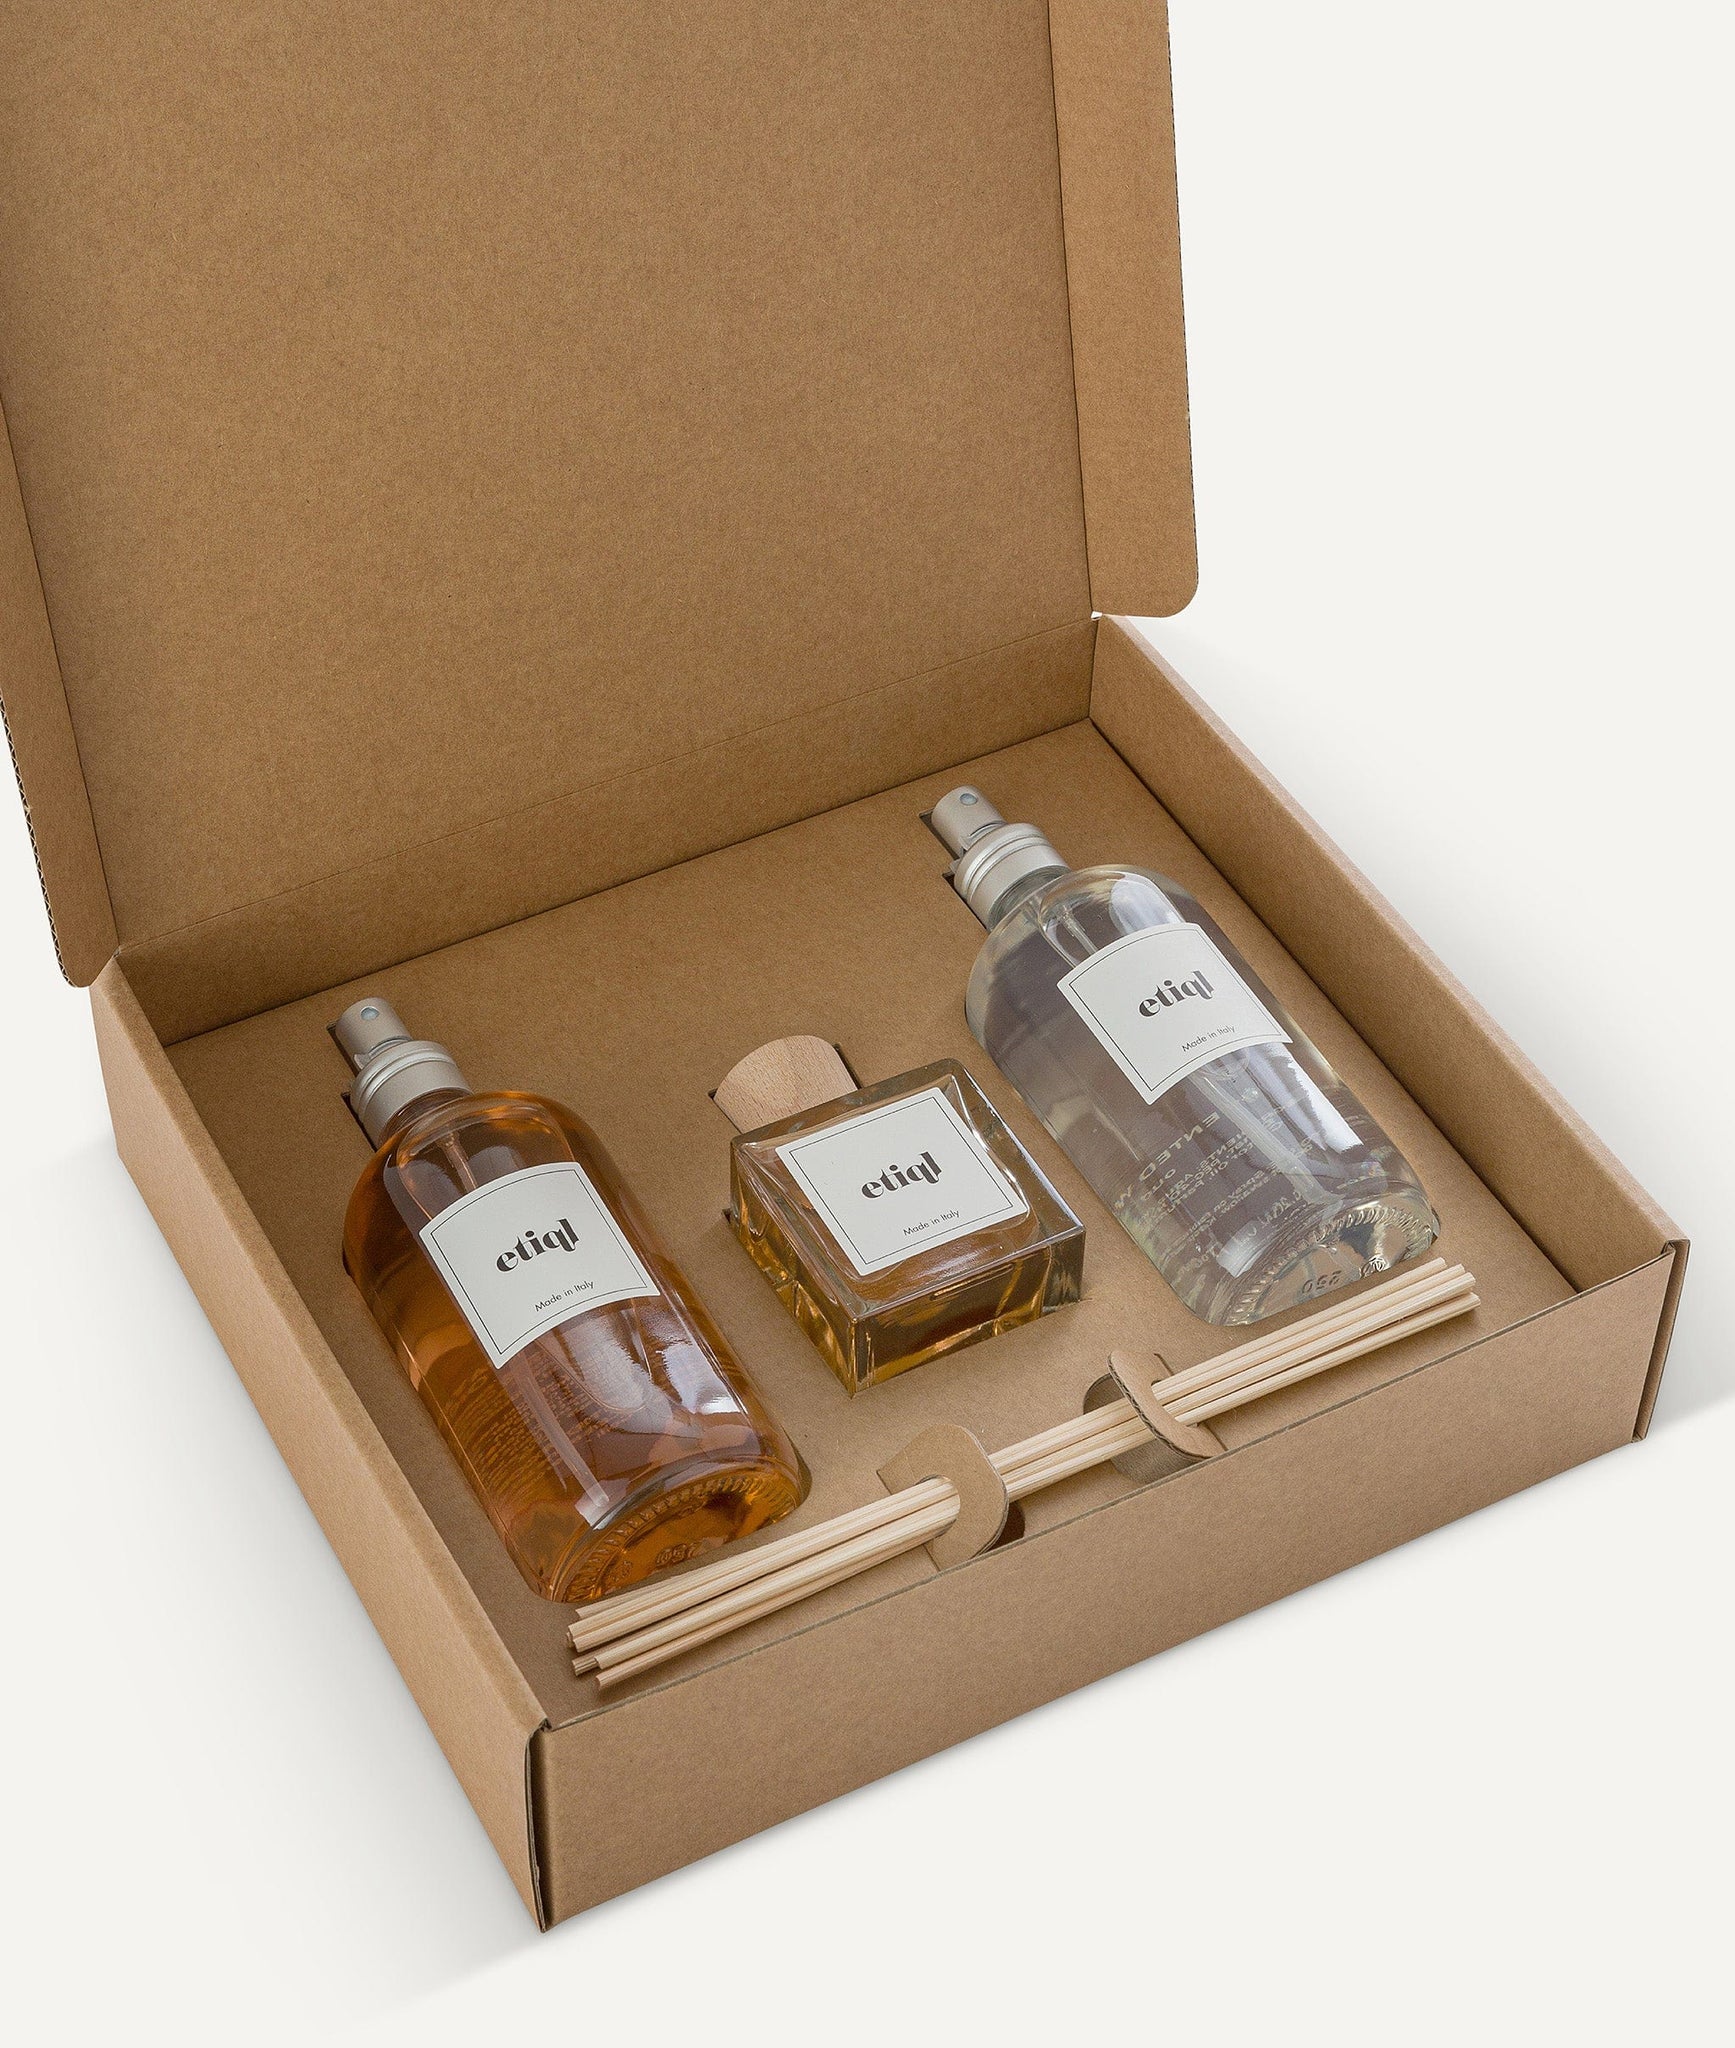 Home Gift Set "Oud" Version